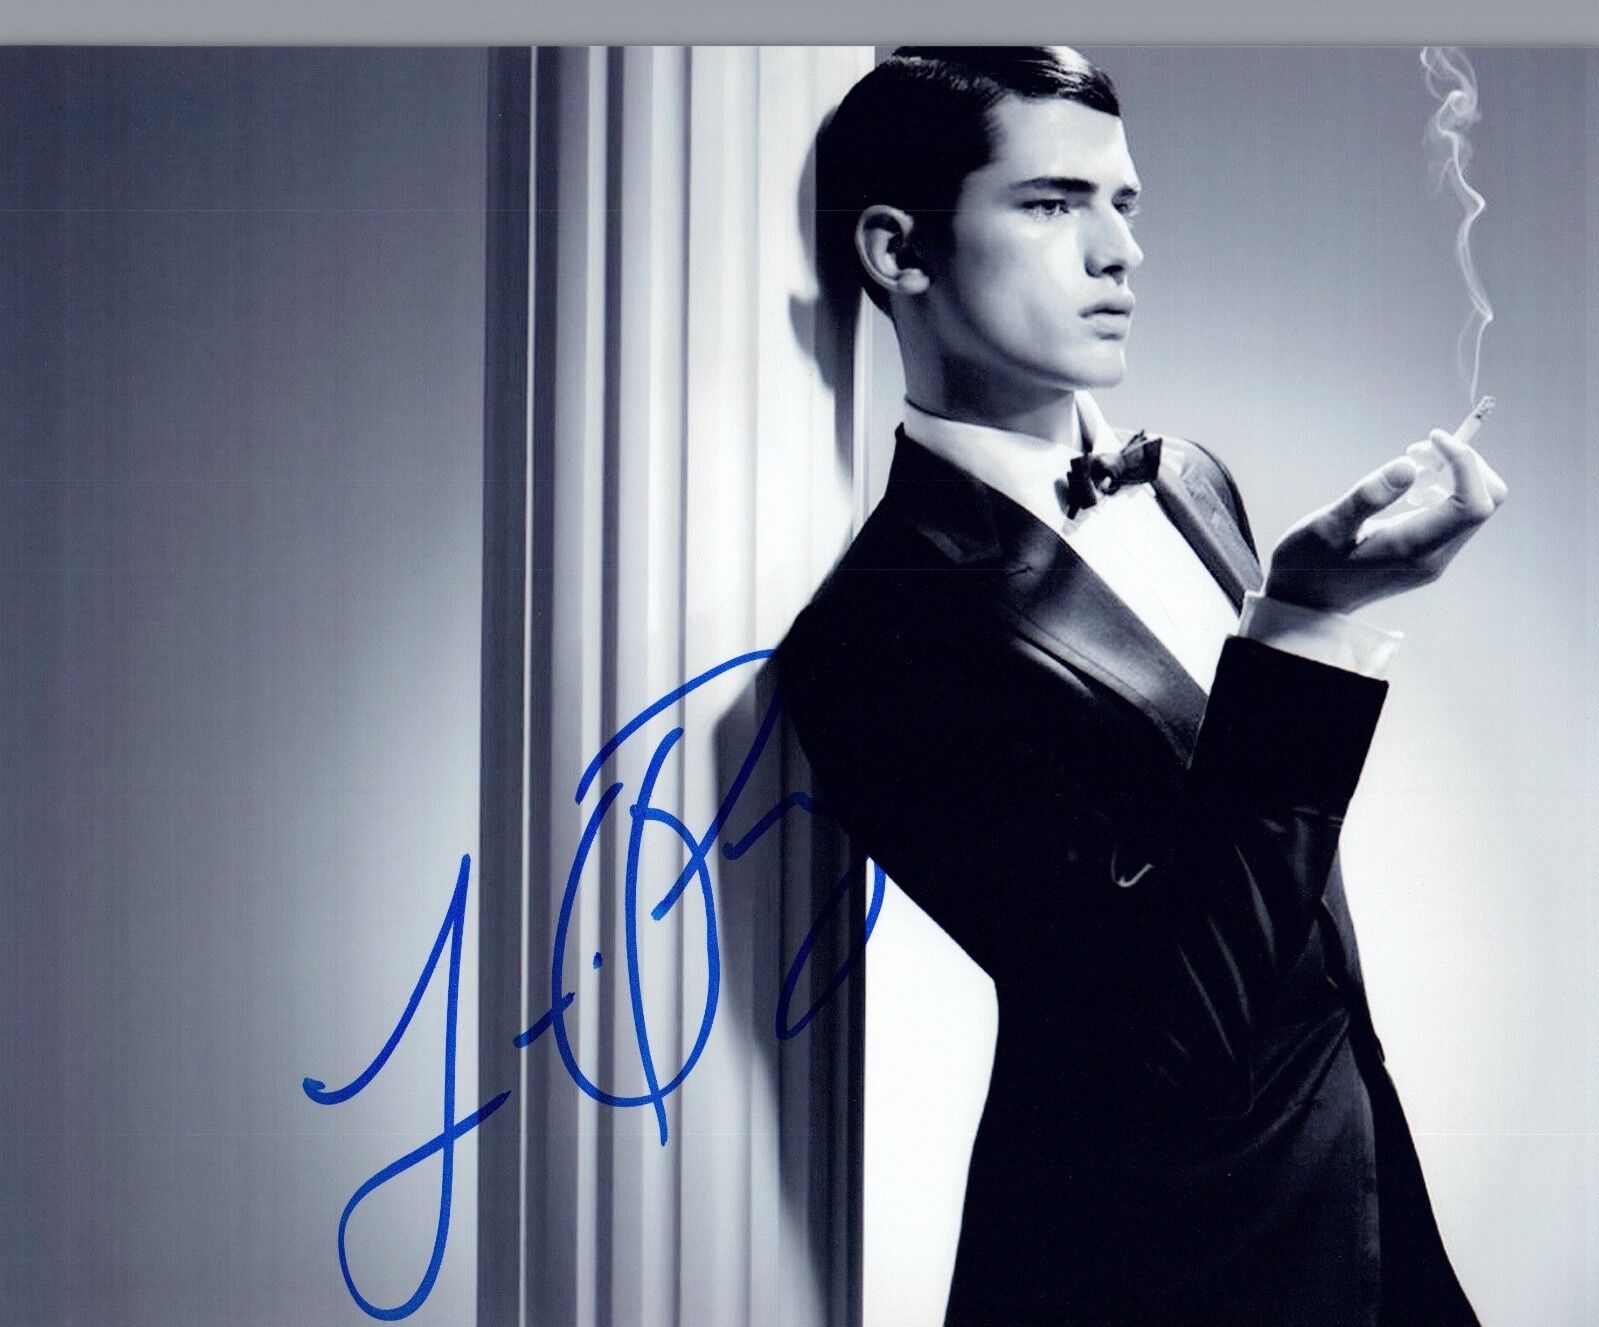 Sean O'Pry Signed Autographed 8x10 Photo Poster painting Handsome Male Model COA VD